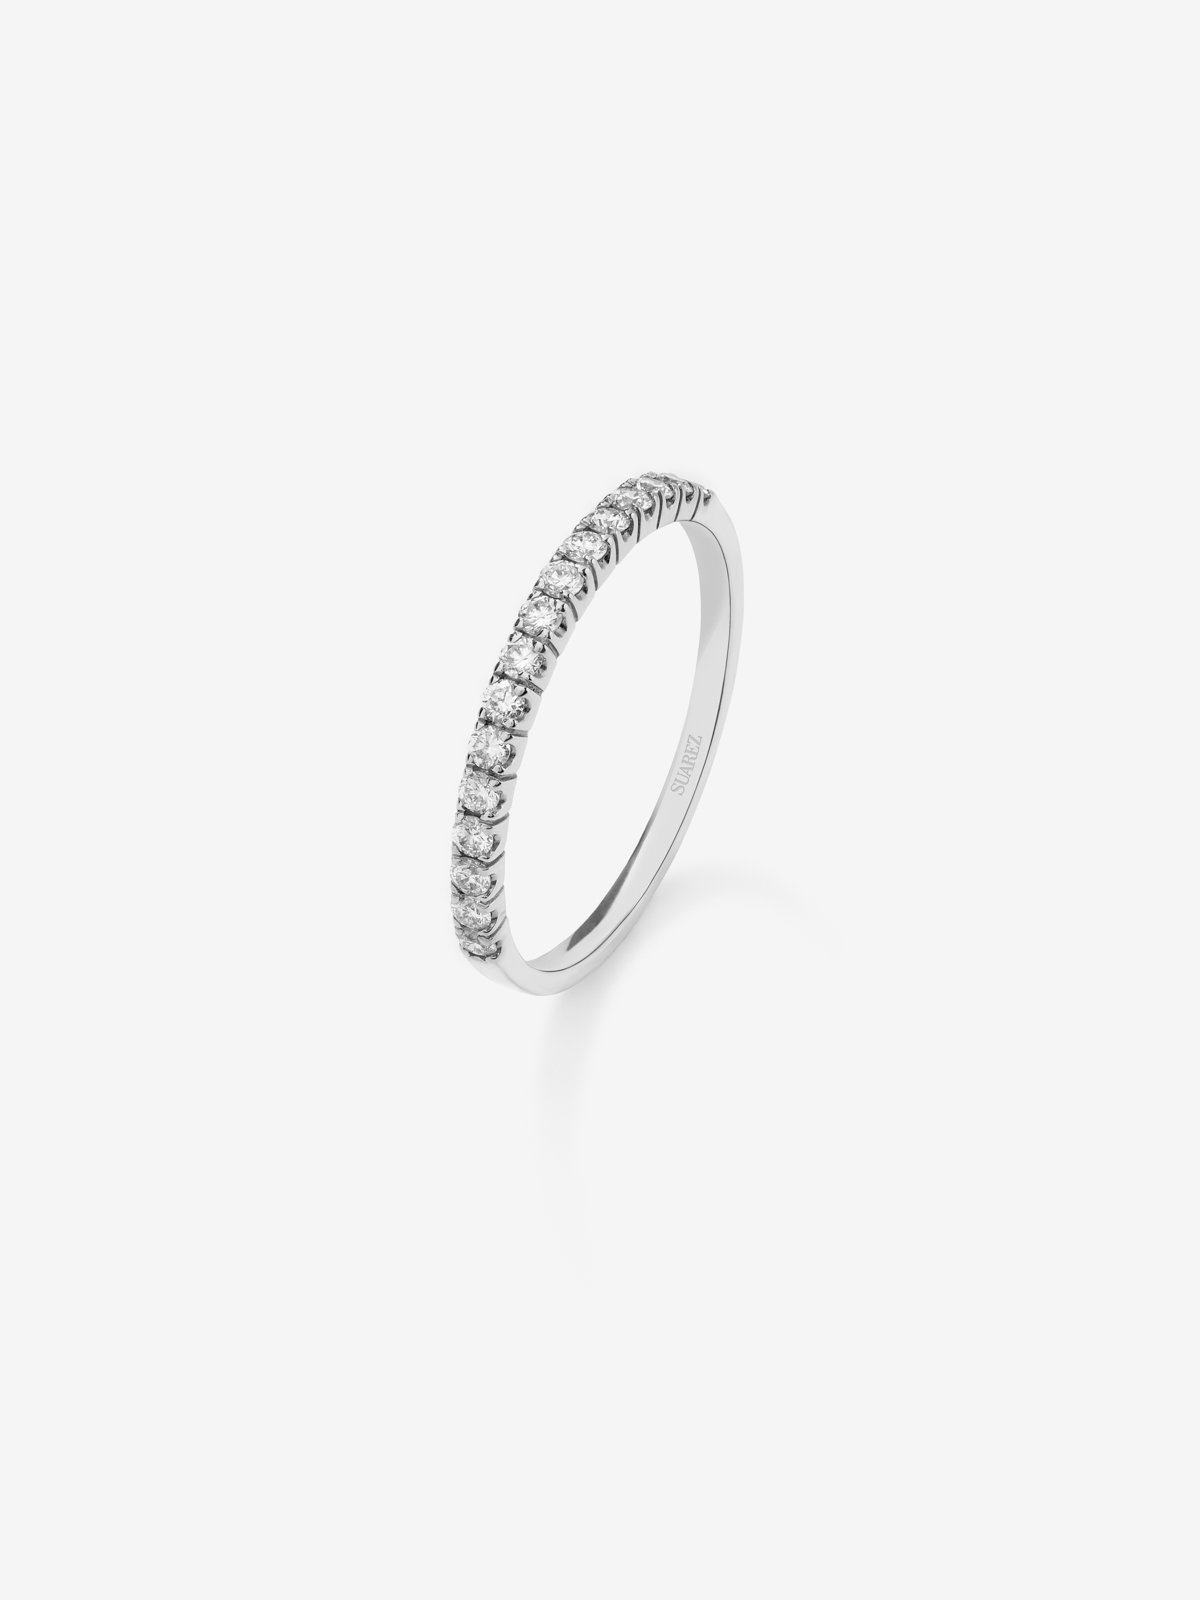 Half ring in 18K white gold with 16 brilliant-cut diamonds with a total of 0.16 cts